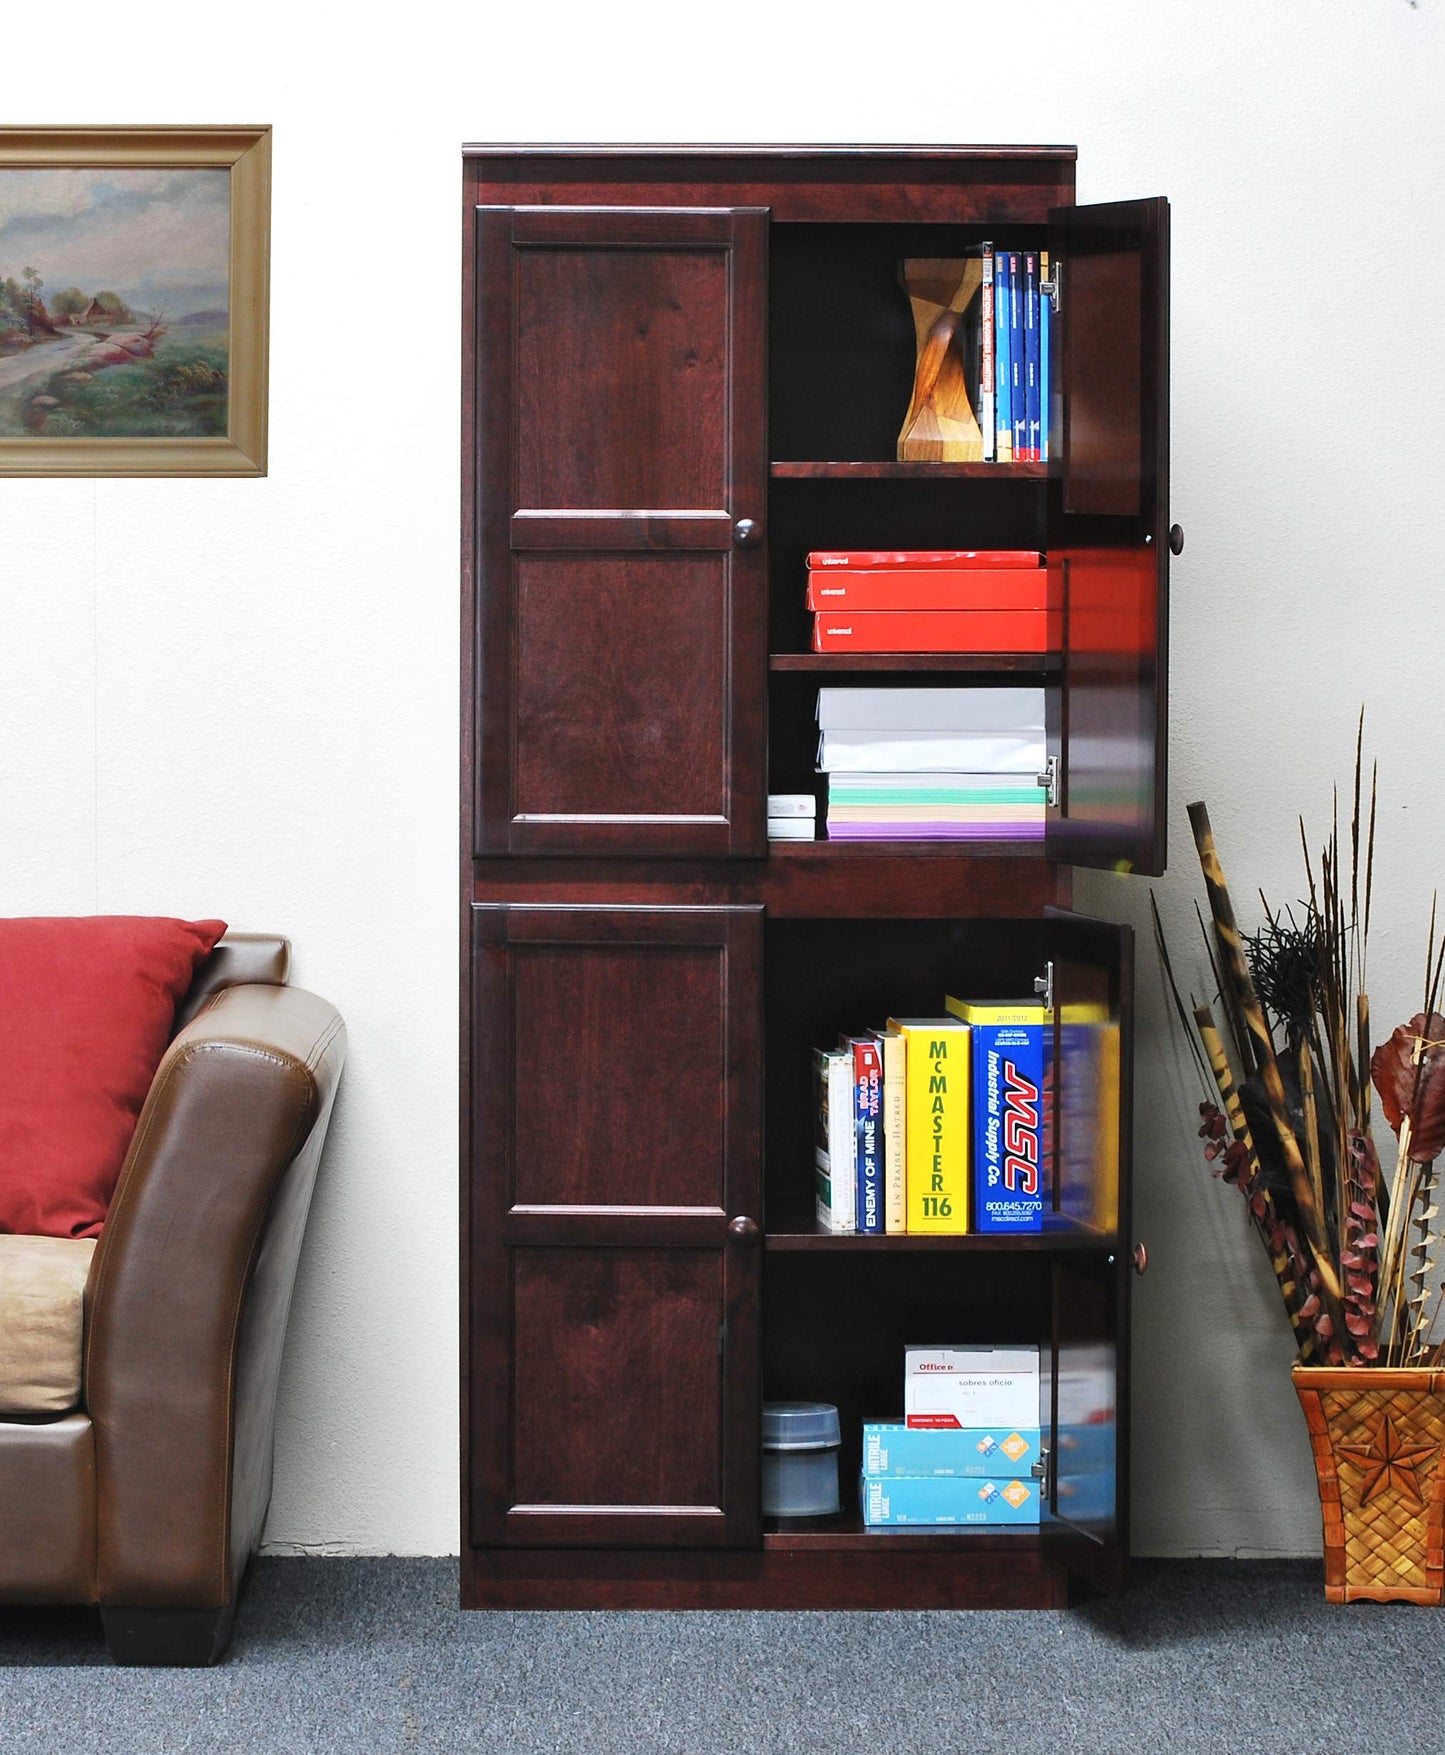 Traditional 72" Wood Storage Cabinet with 5-Shelves in Cherry